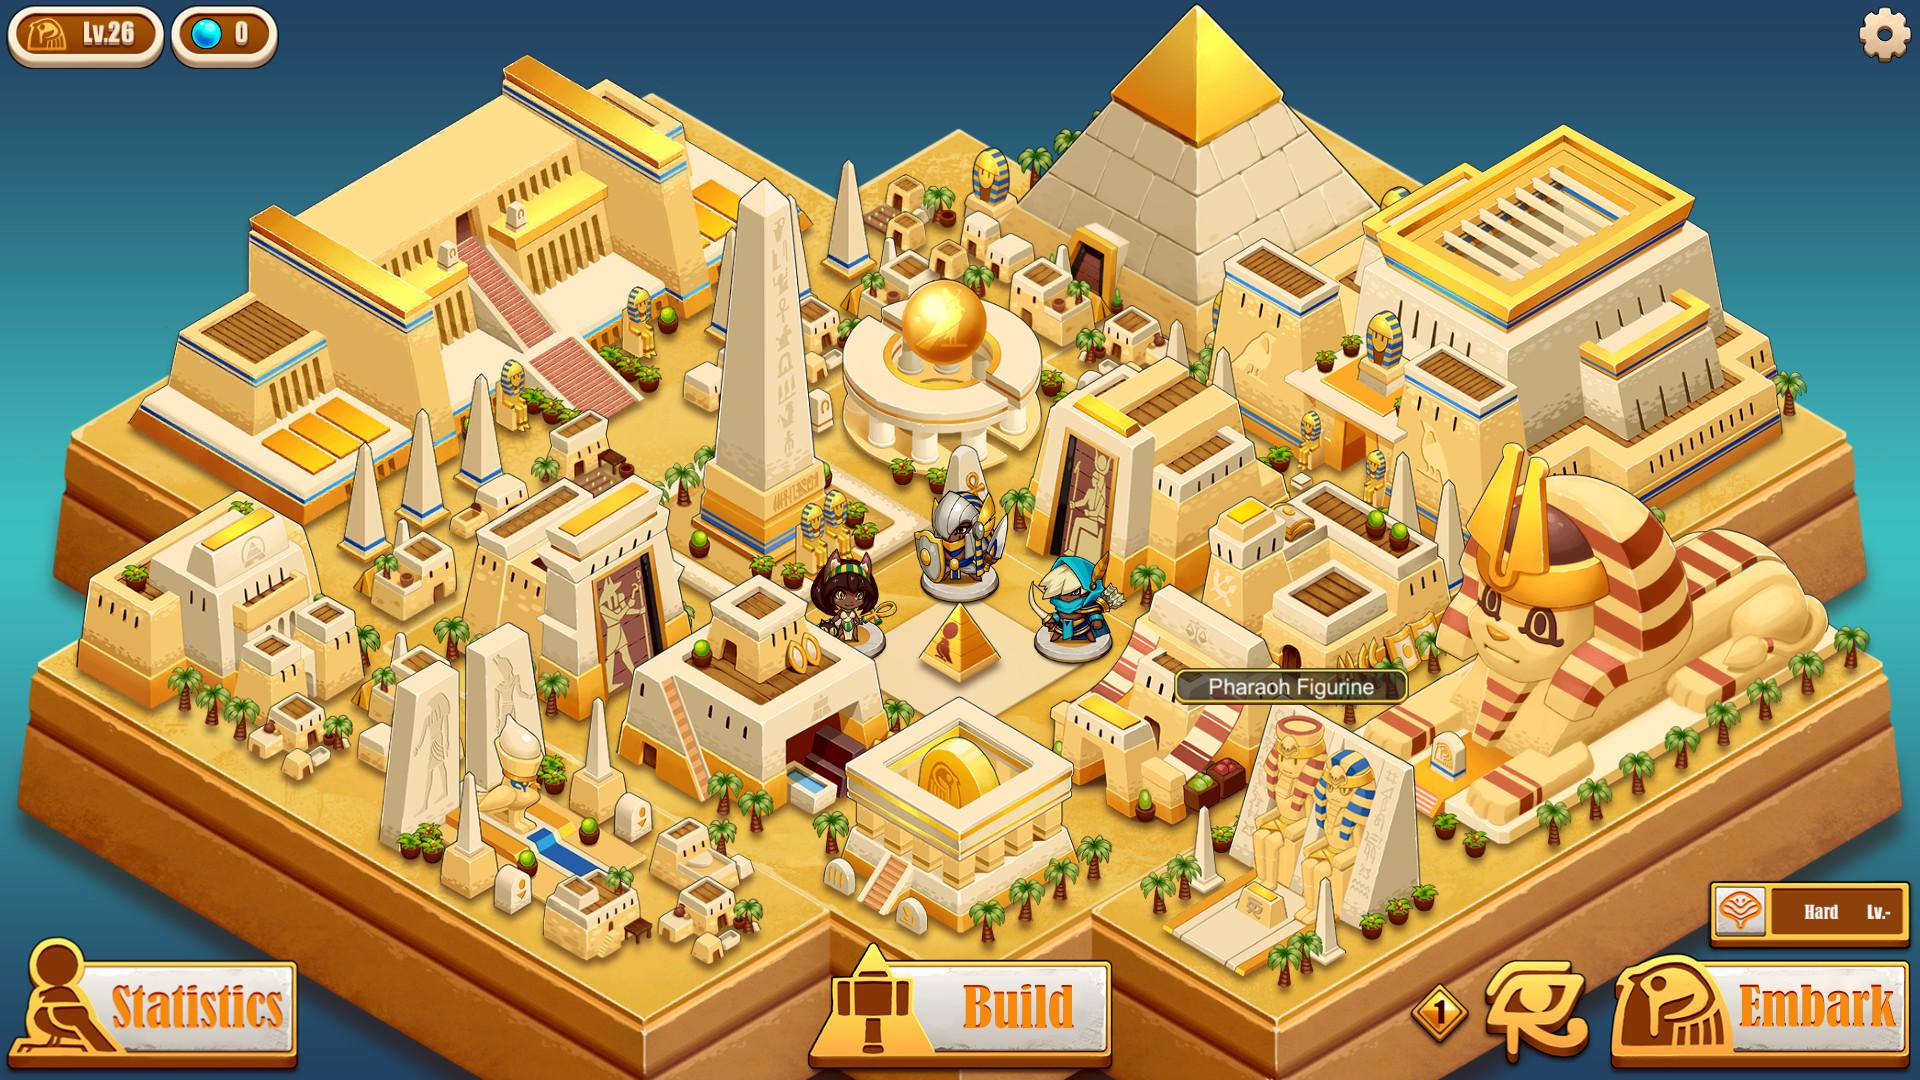 Screenshot №4 from game Warriors of the Nile